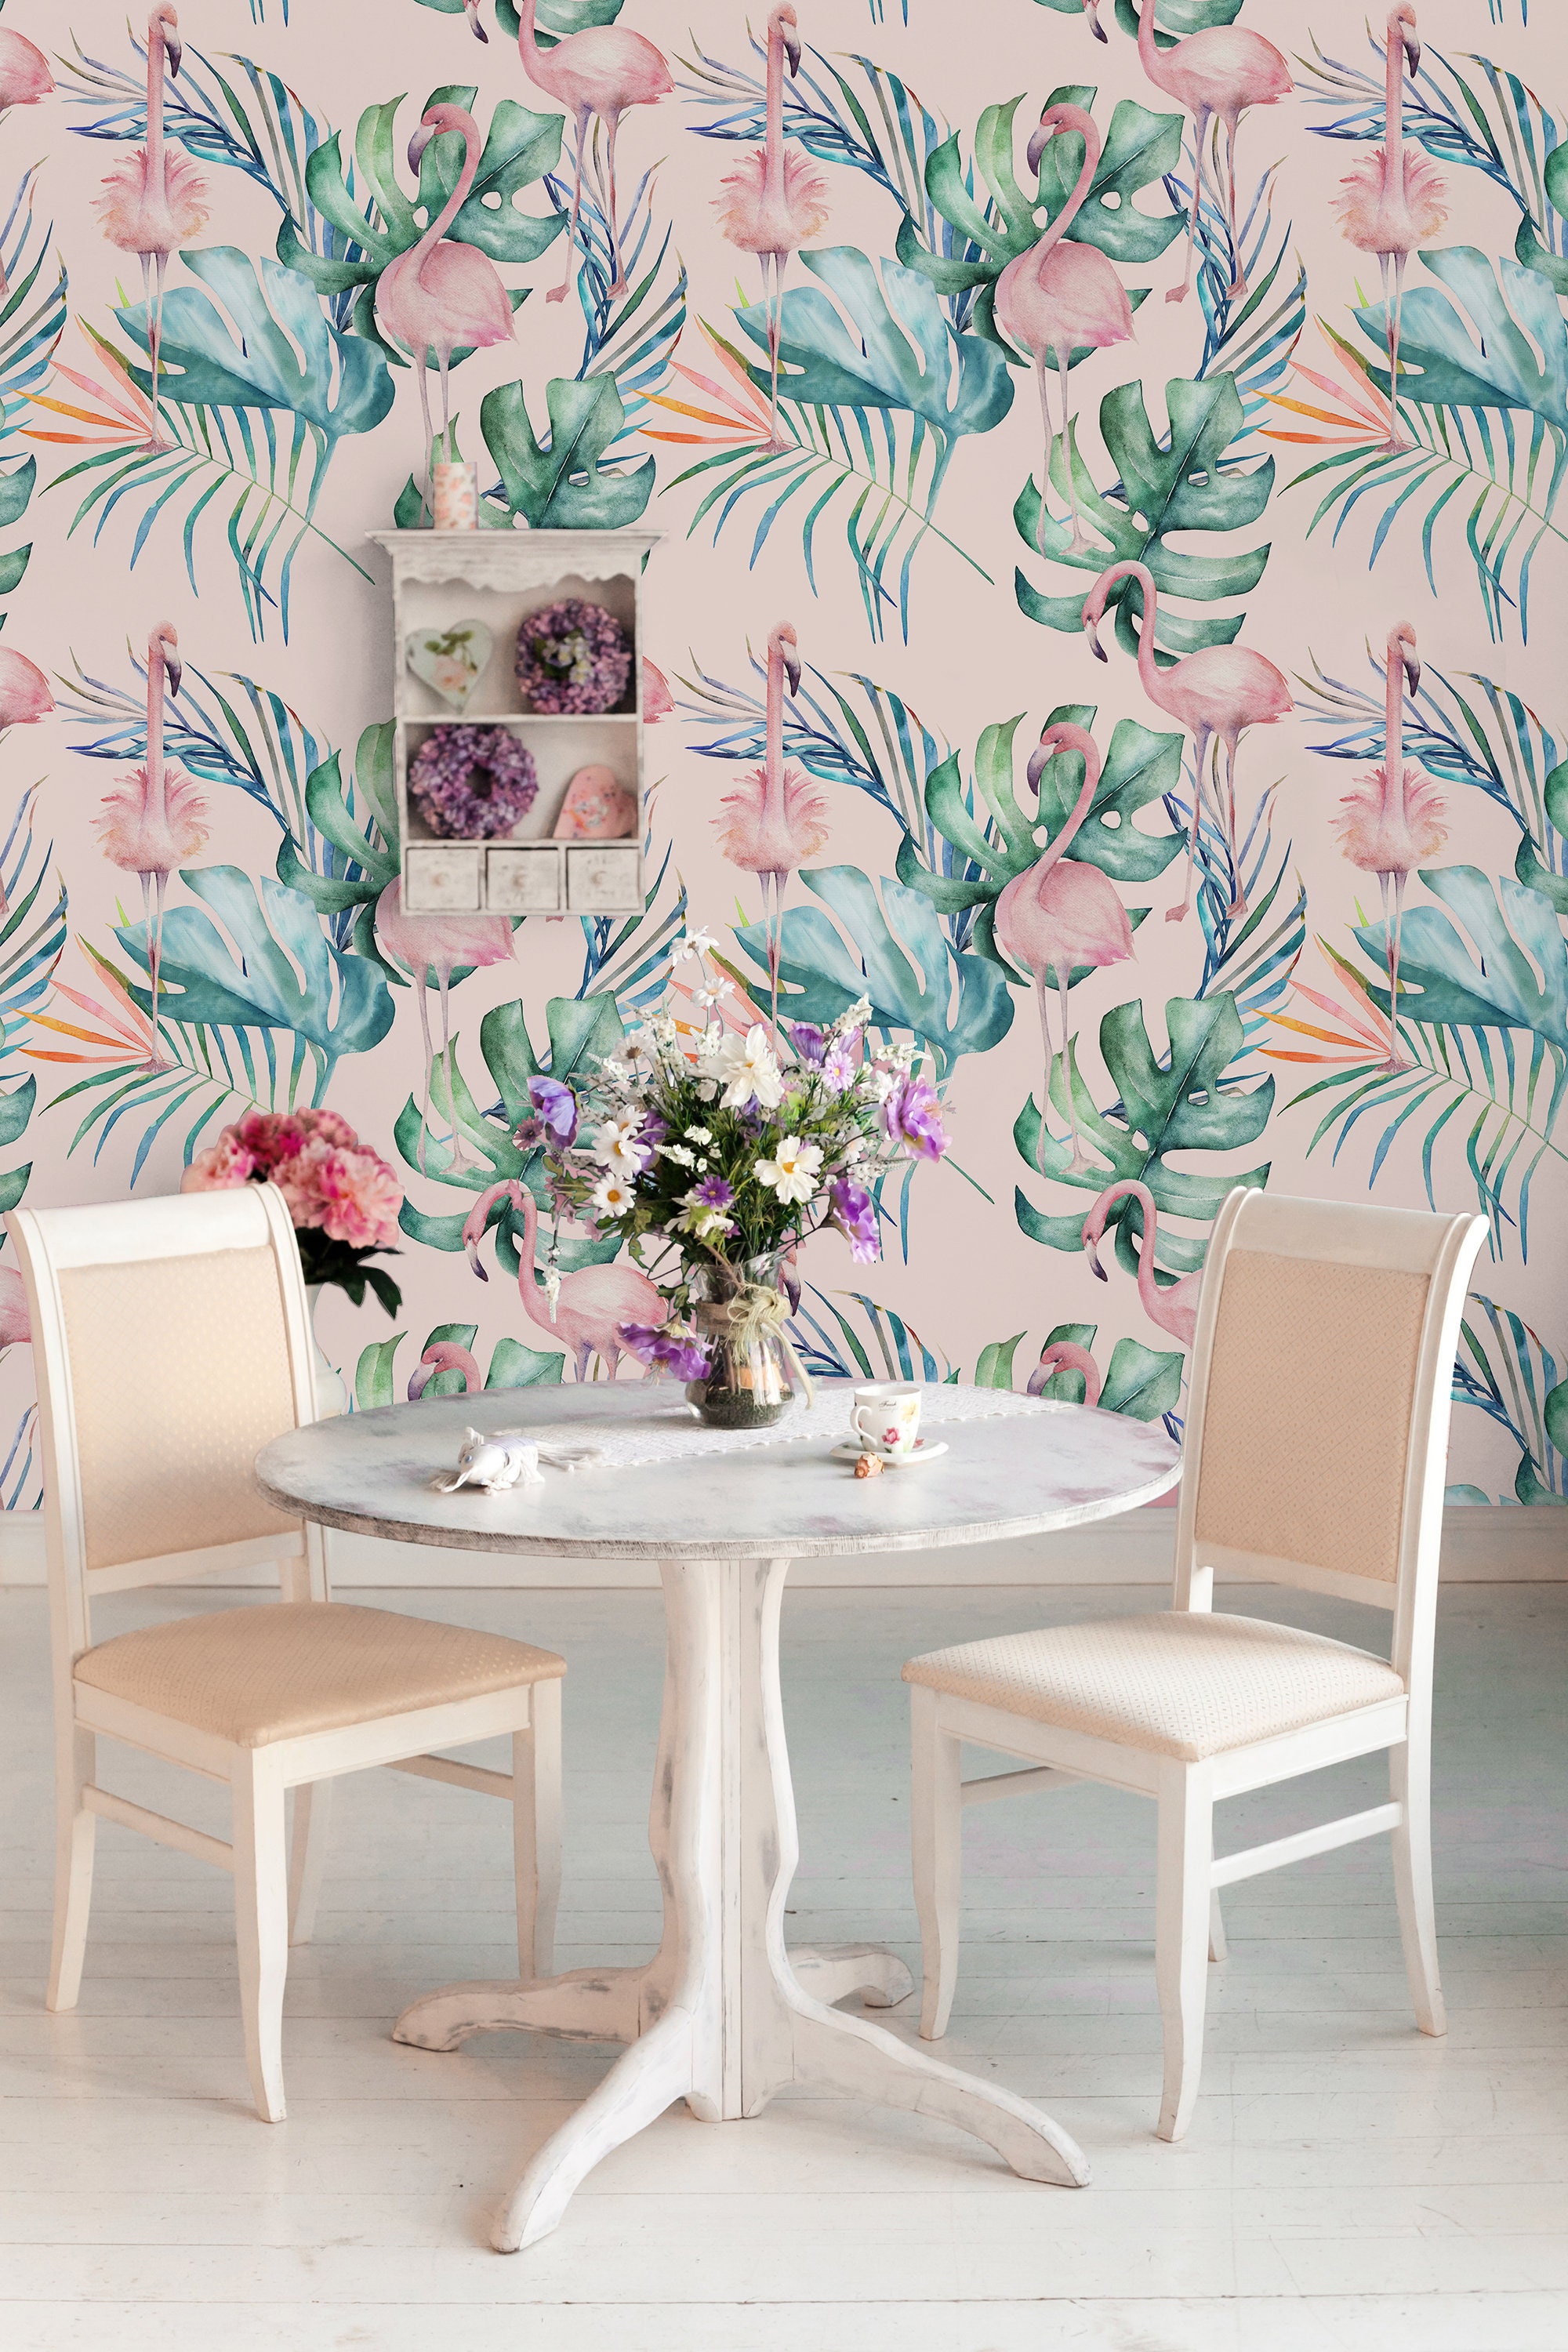 Buy Pink Wallpaper Online In India  Etsy India